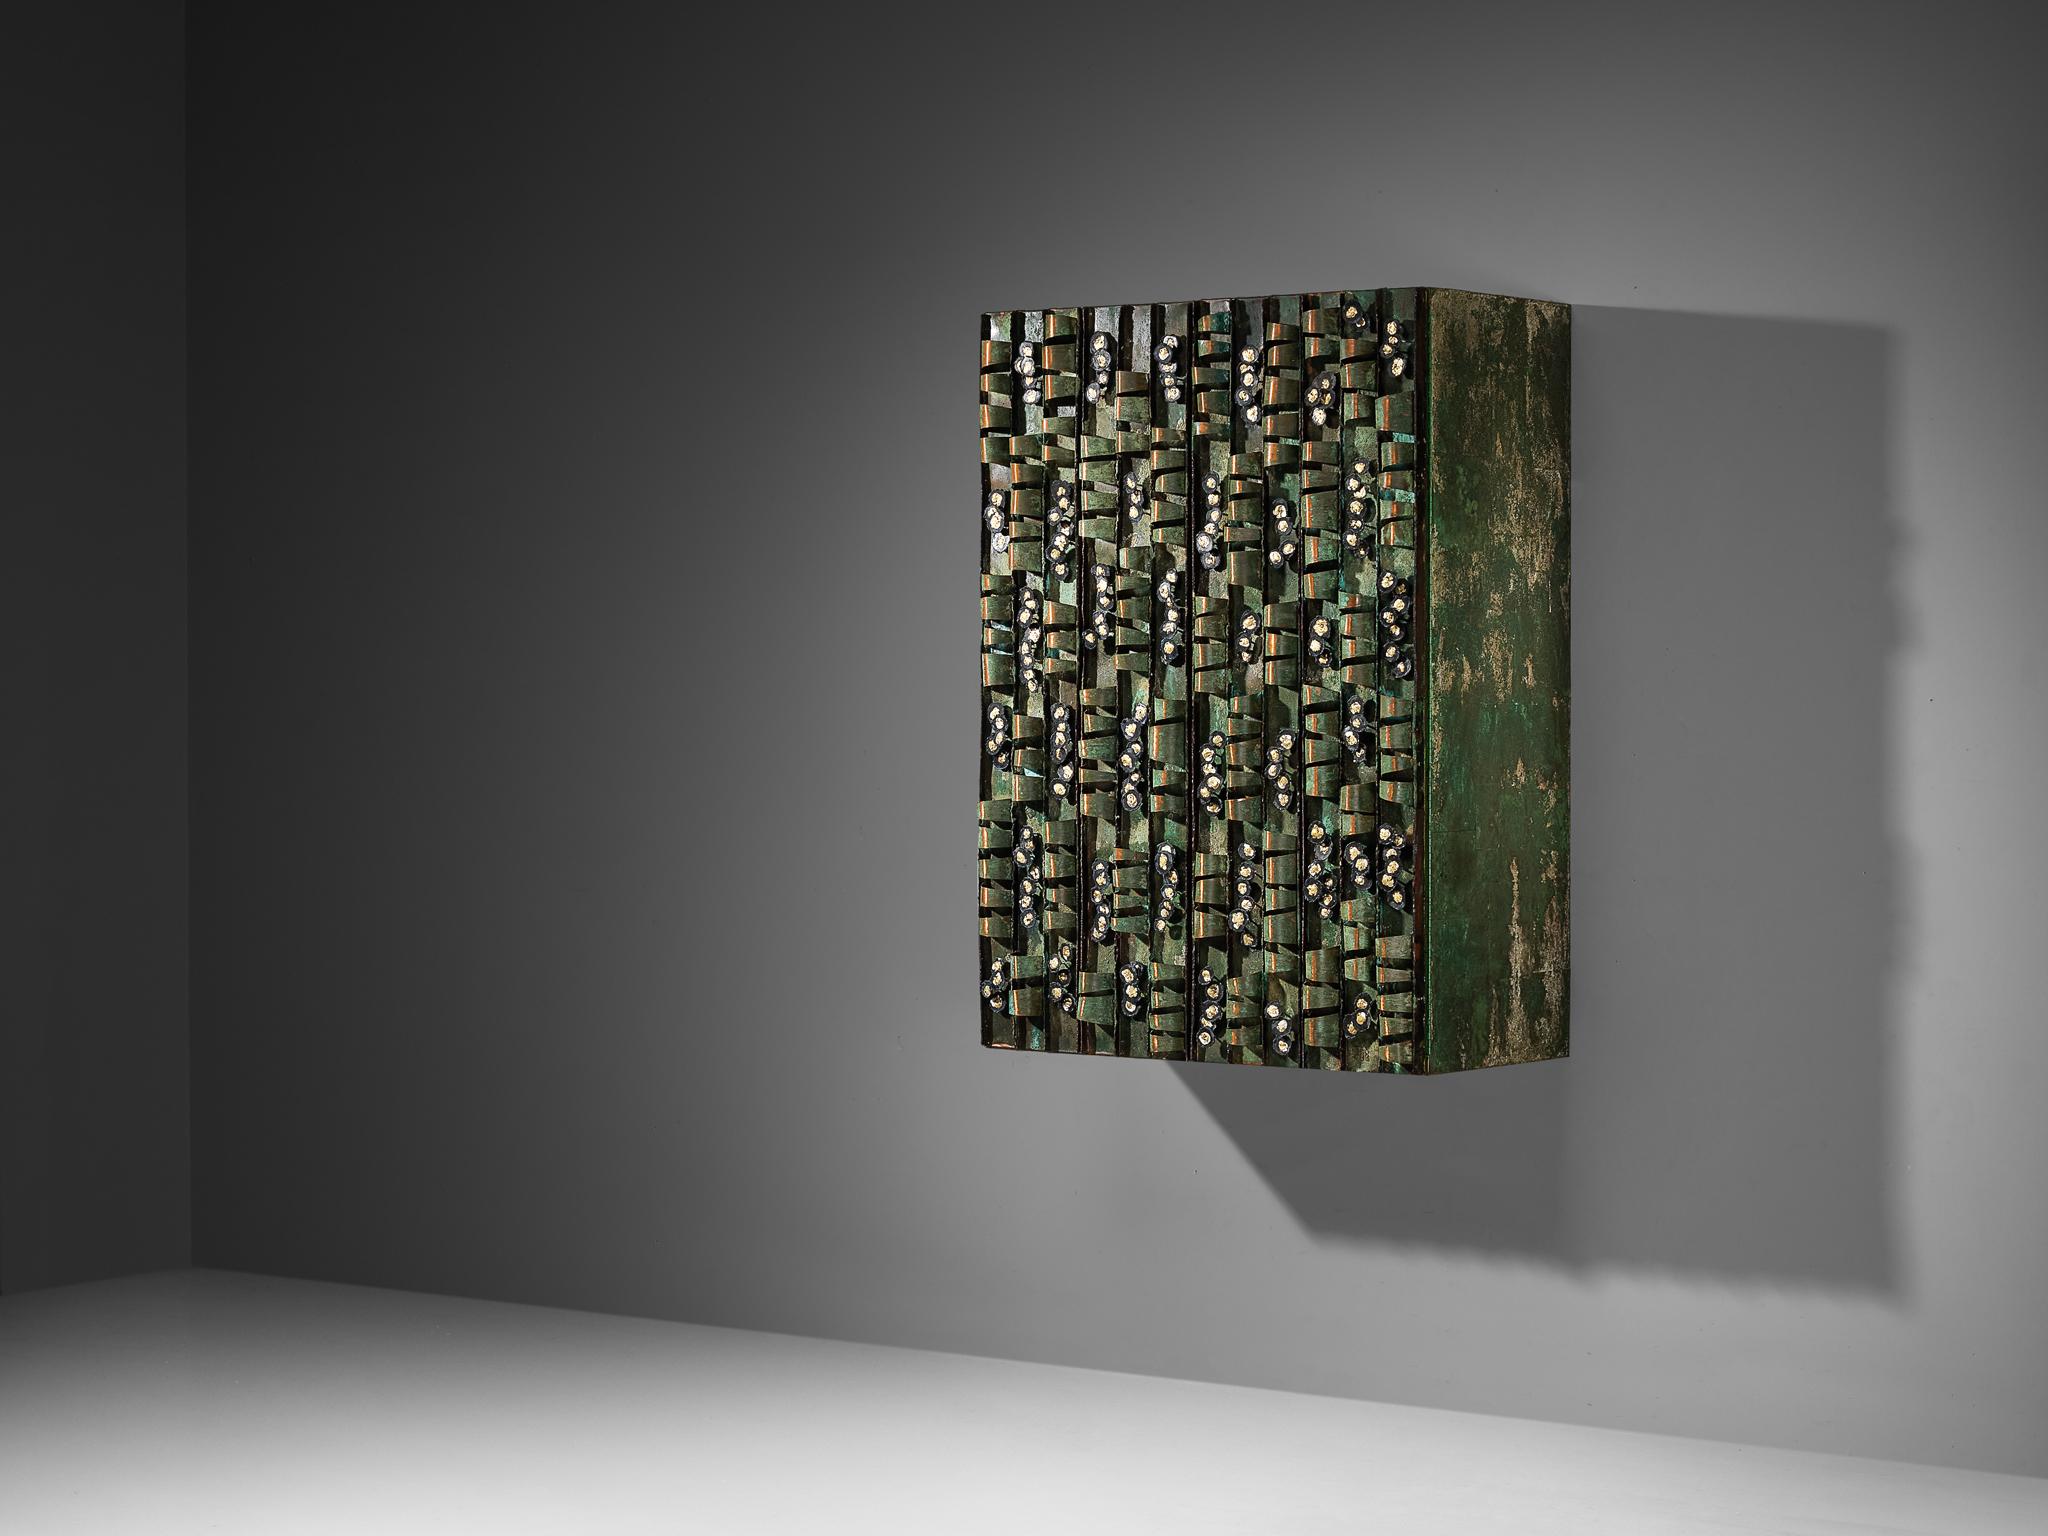 Paul Evans for Paul Evans Studio, ‘Loop’ wall-mounted cabinet, welded copper with applied verdigris patina, steel, brass, painted wood, United States, circa 1968

Made around 1968, this Verdigris Copper Loop wall-mounted cabinet, also known as Loop,